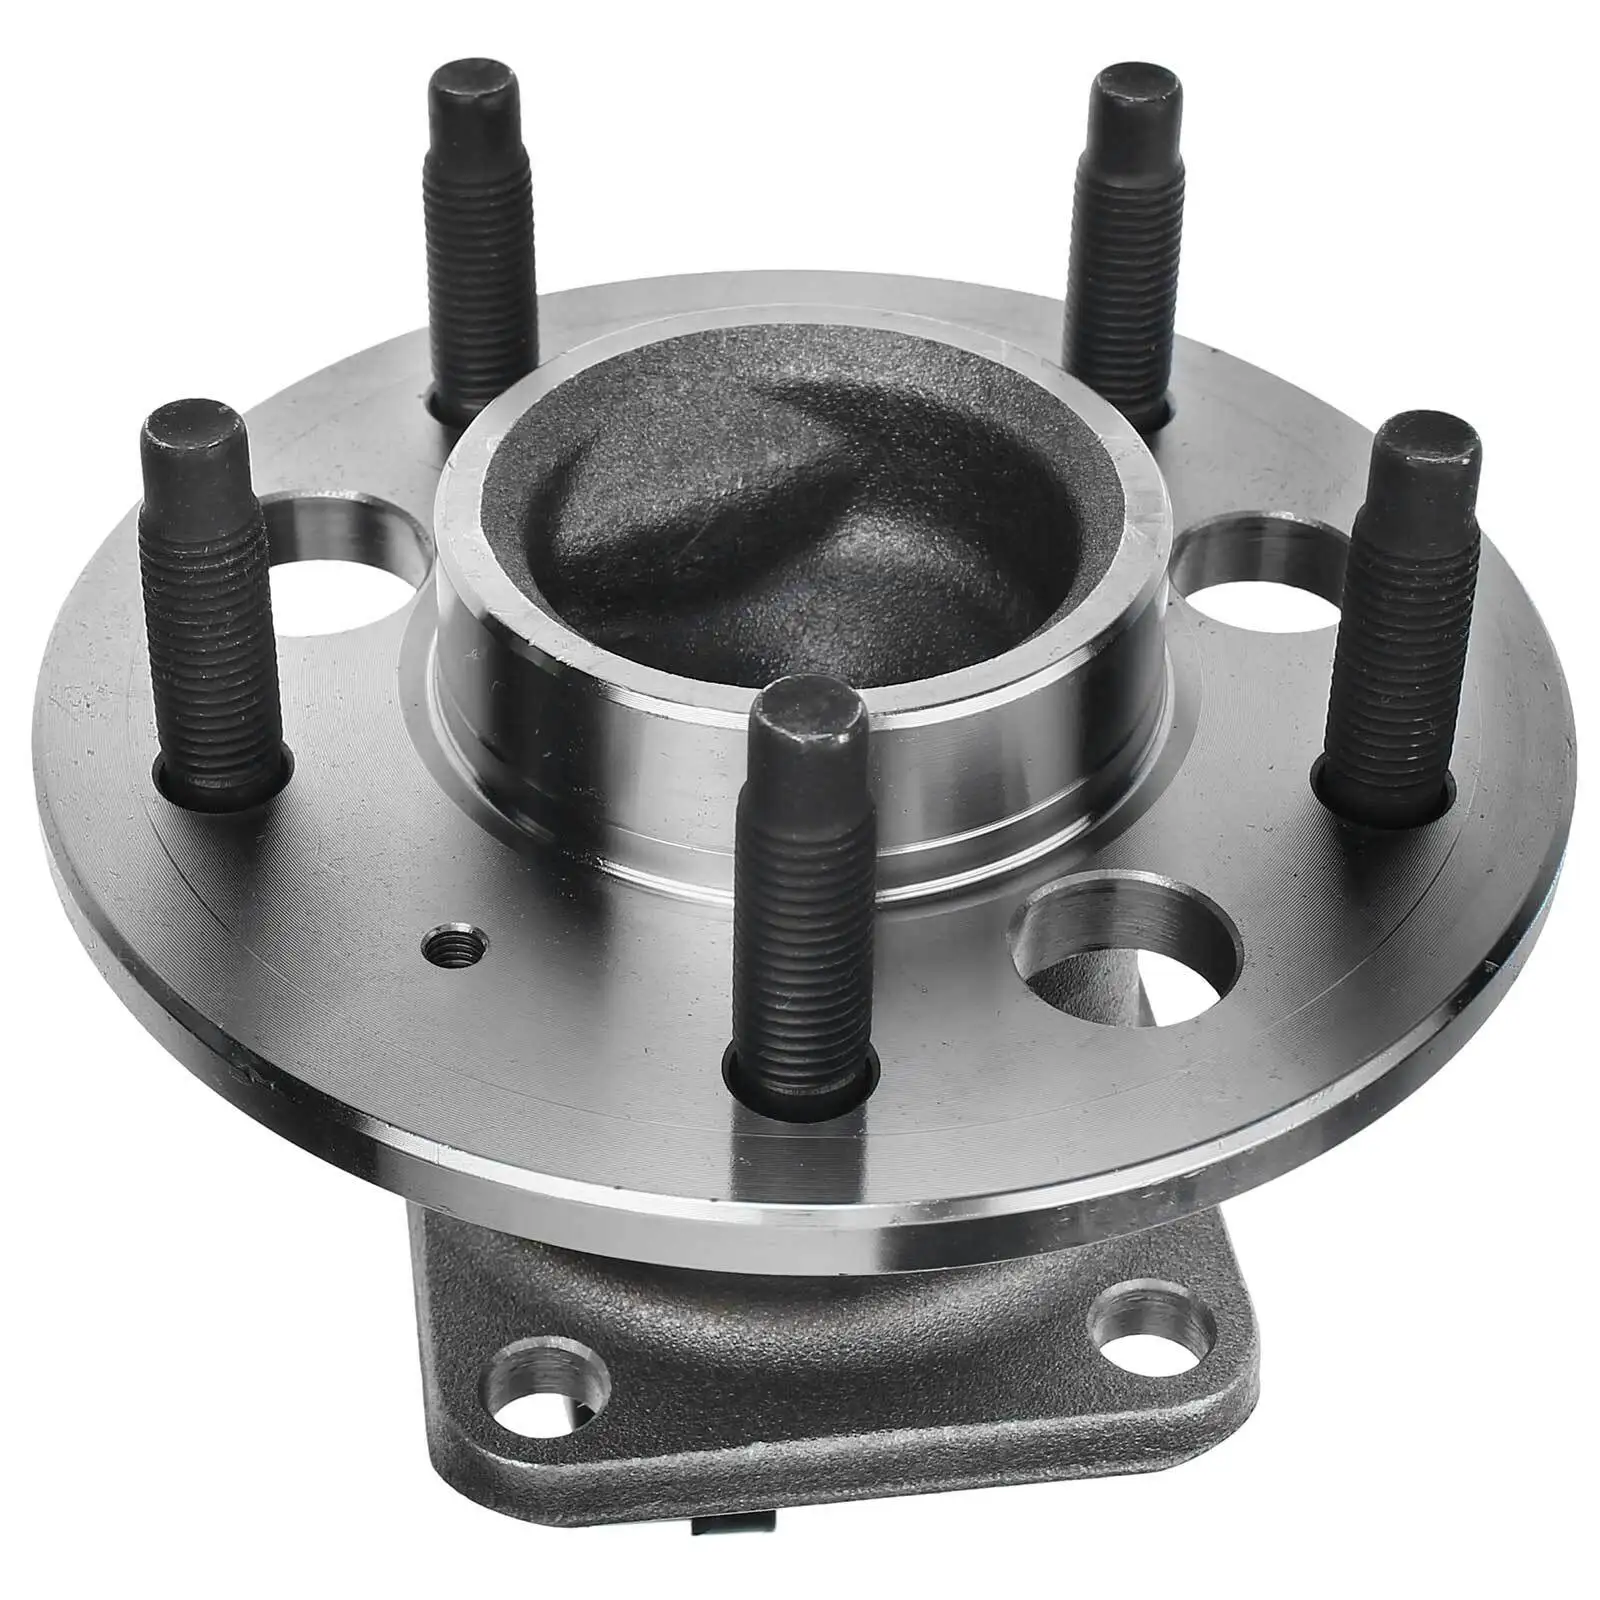 

A3 Automobile Rear Wheel Hub Bearing Assembly for Chevy Malibu Buick LeSabre Cadillac DTS Olds